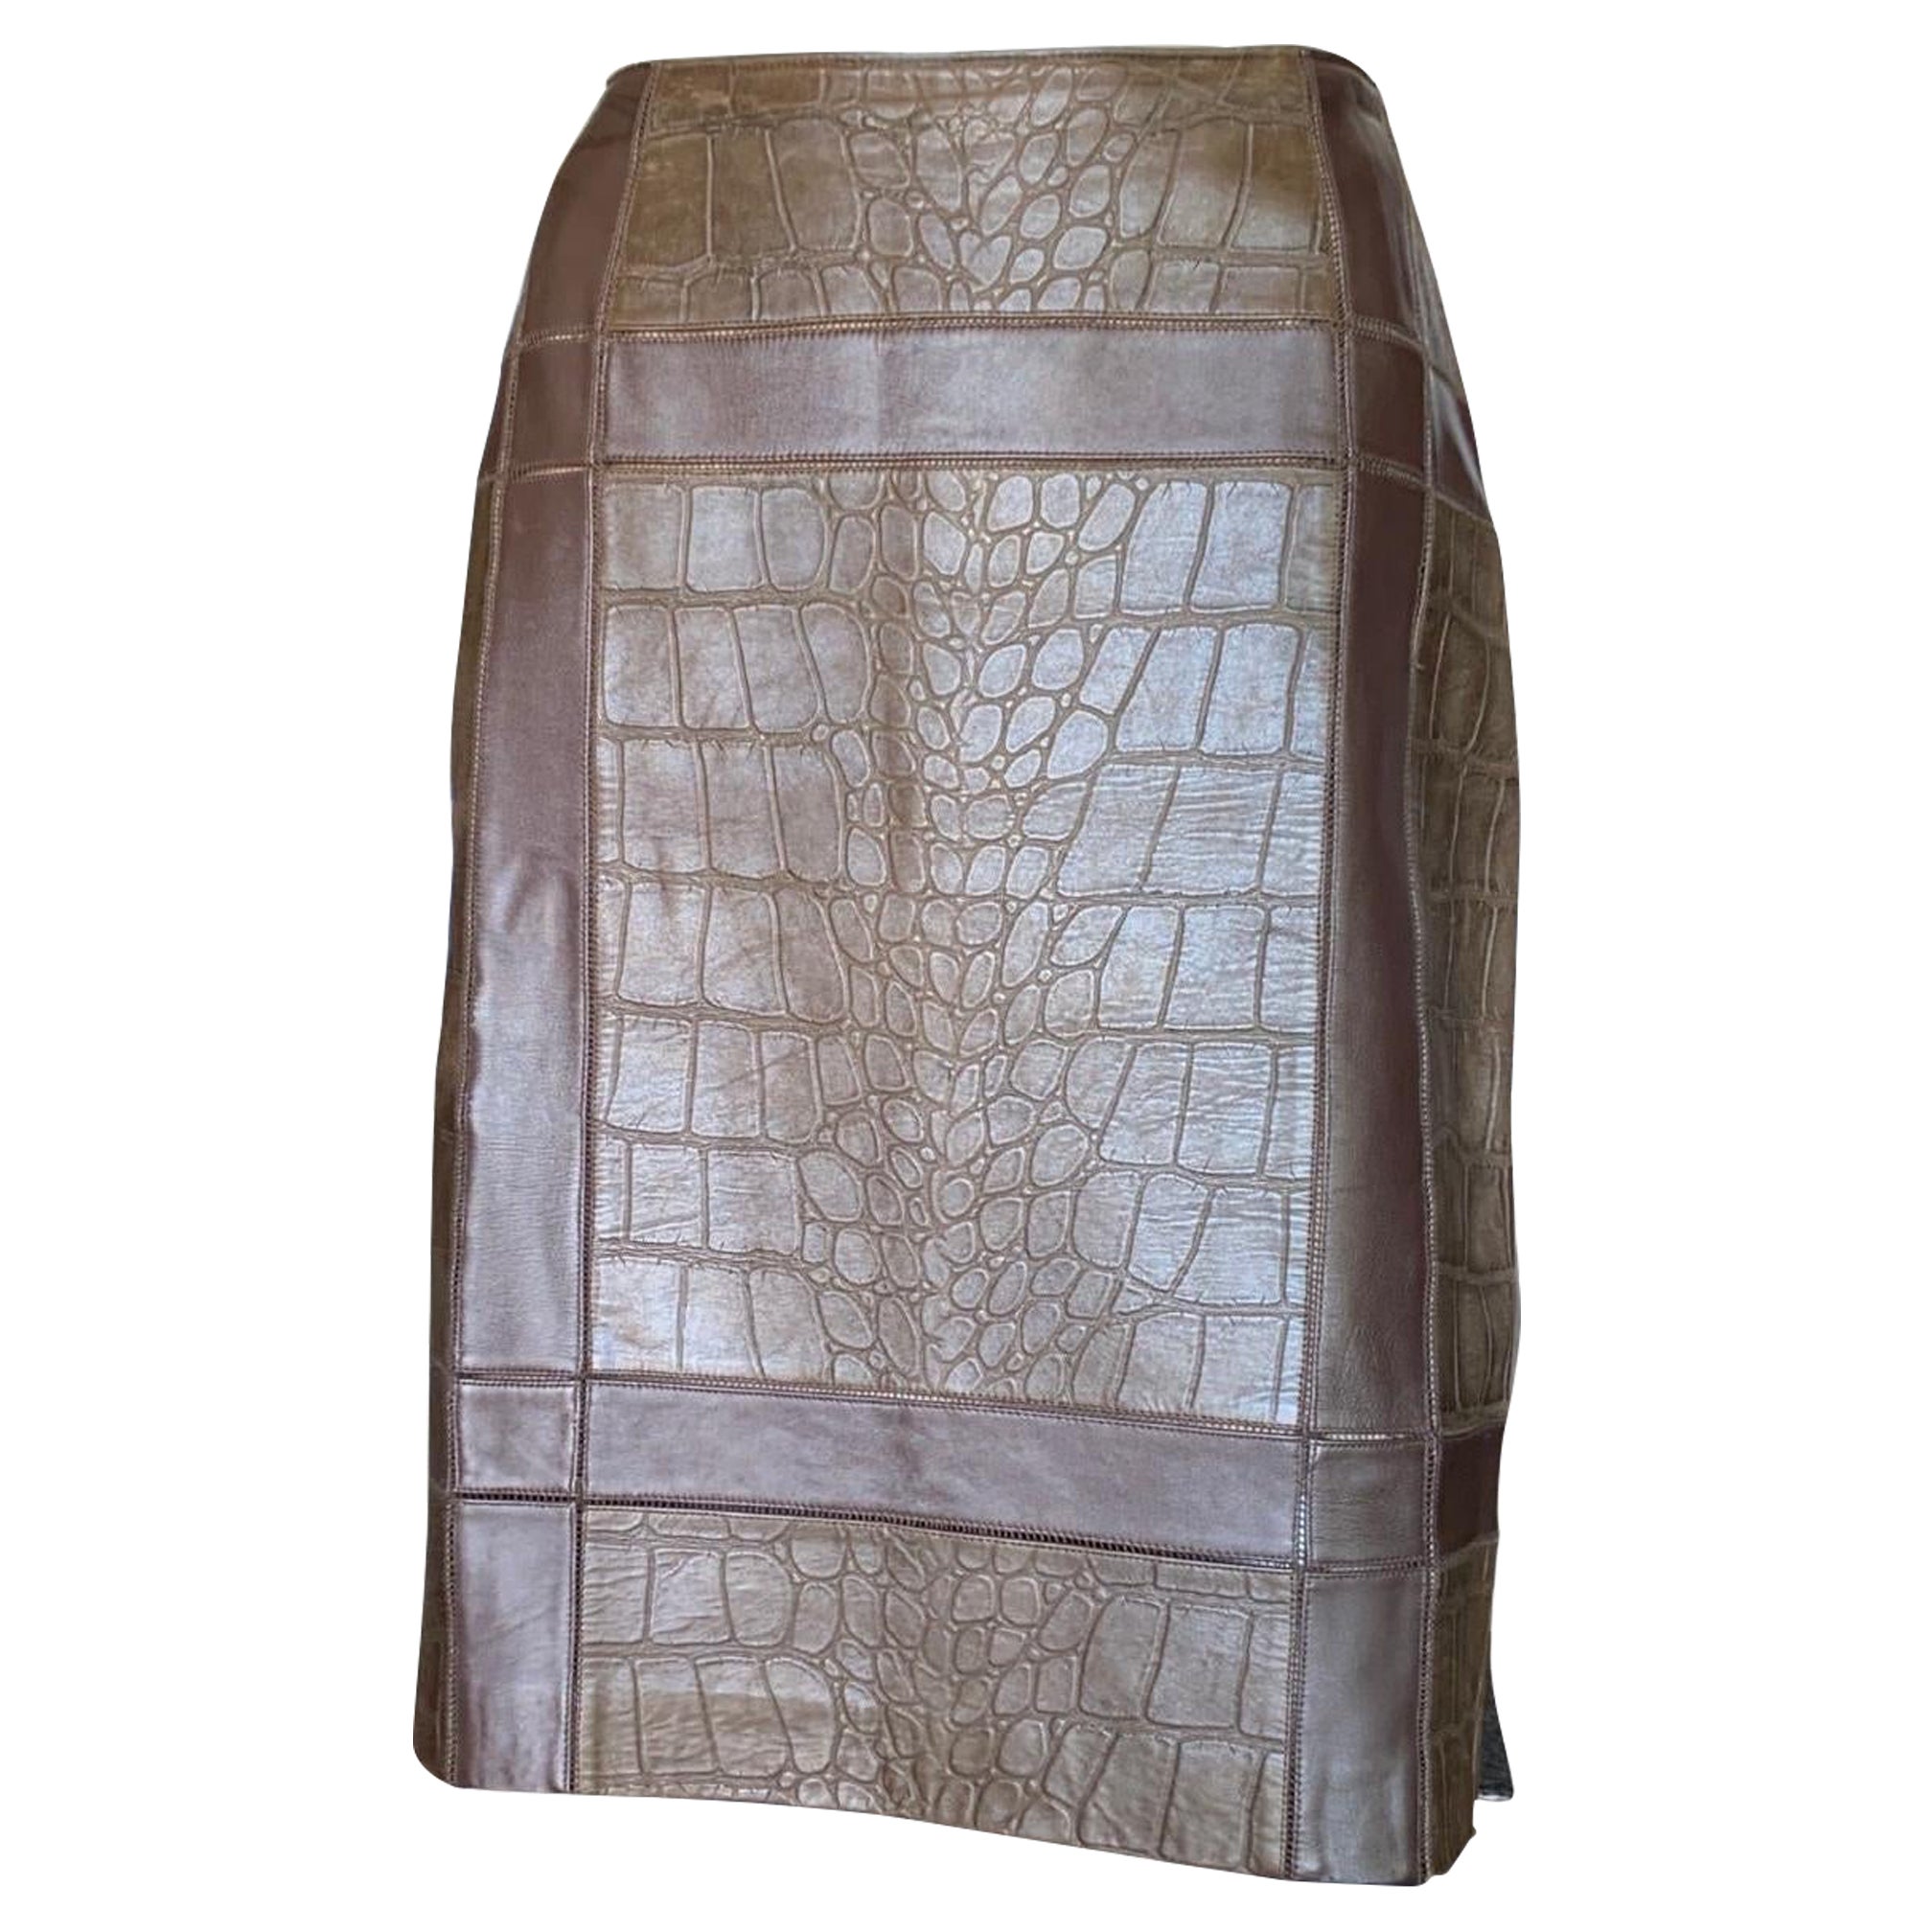 A super chic Oscar de la Renta leather skirt, hand pieced in Alligator embossed and flat brown leather. Purchased at Saks Fifth Avenue, NYC. lined in silk. The workmanship of this skirt shows how high end it is. Hand Made in USA. Size tag removed.